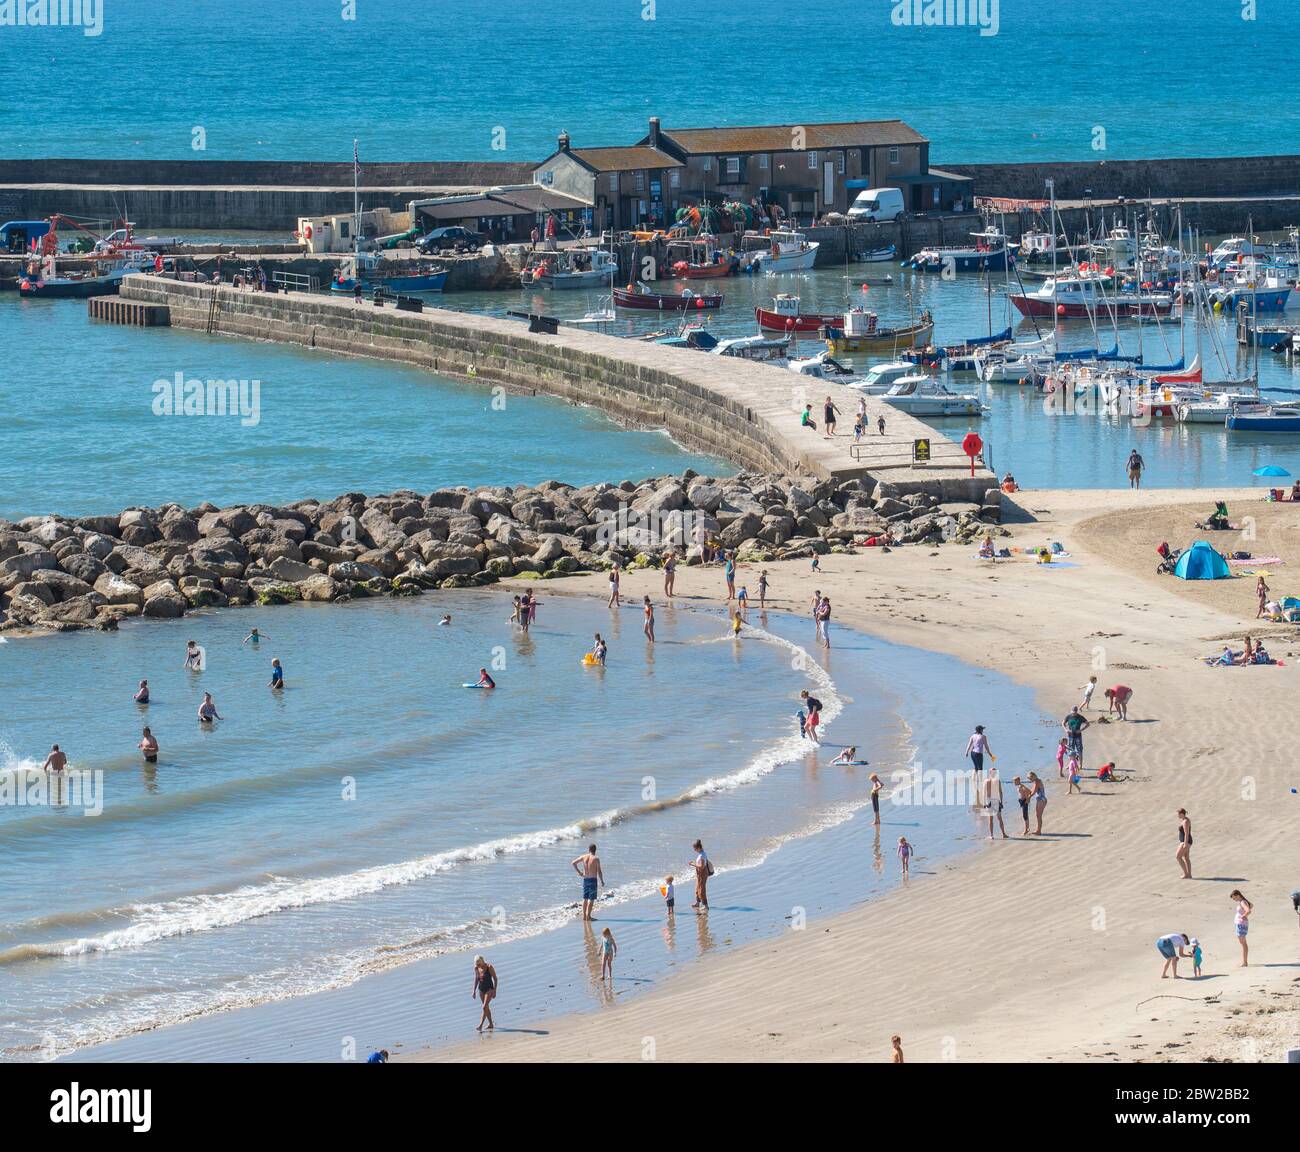 Lyme Regis, Dorset, UK. 29th May, 2020. UK Weather. Scorching hot sunshine and clear blue skies at the seaside resort of Lyme Regis on the hottest day of the year so far. Families and beachgoers are expected to flock to the beach to enjoy socially-distanced sunbathing as the heatwave continues into the weekend. Credit: Celia McMahon/Alamy Live News Stock Photo